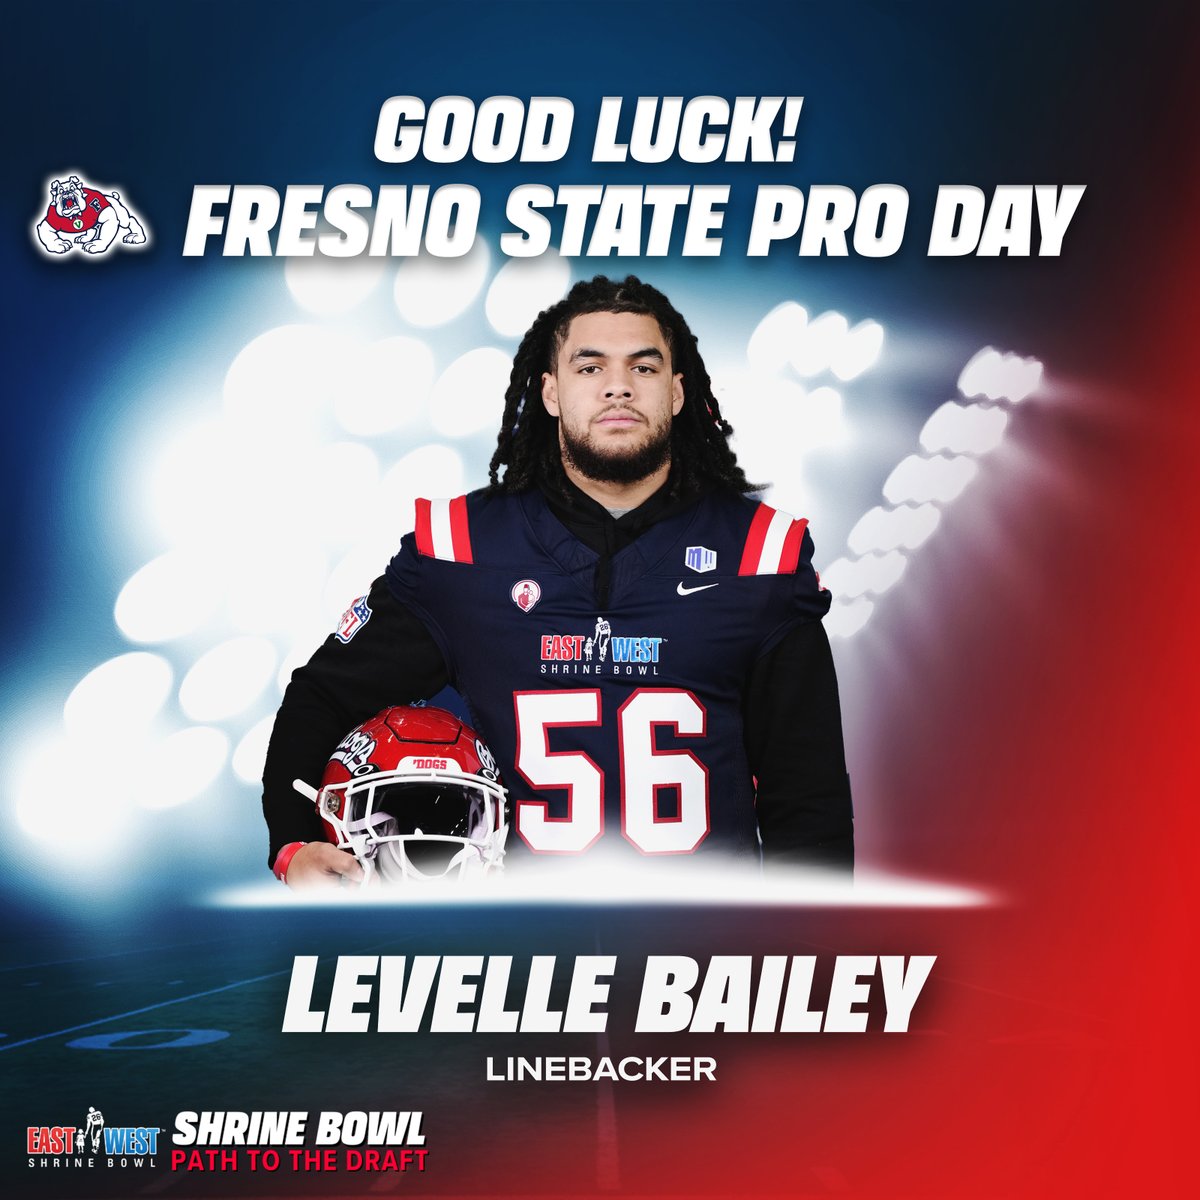 Good luck to our #ShrineBowl star Levelle Bailey (@LevelleBailey6) at @FresnoStateFB Pro Day! #GoDogs